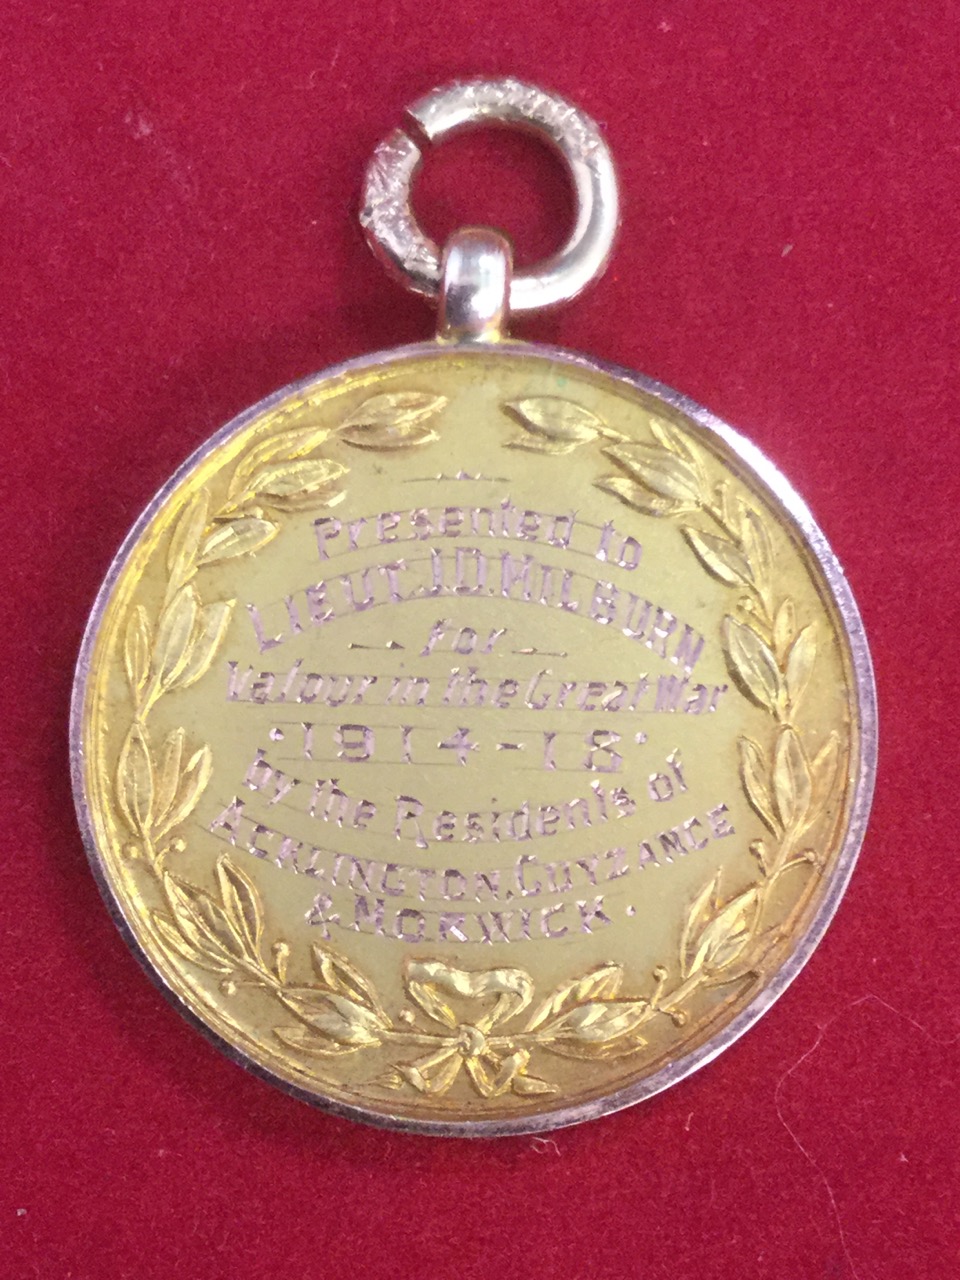 A gold medal awarded to Lt JD Milburn by the residents of Acklington, Guyzance & Morwick for valour